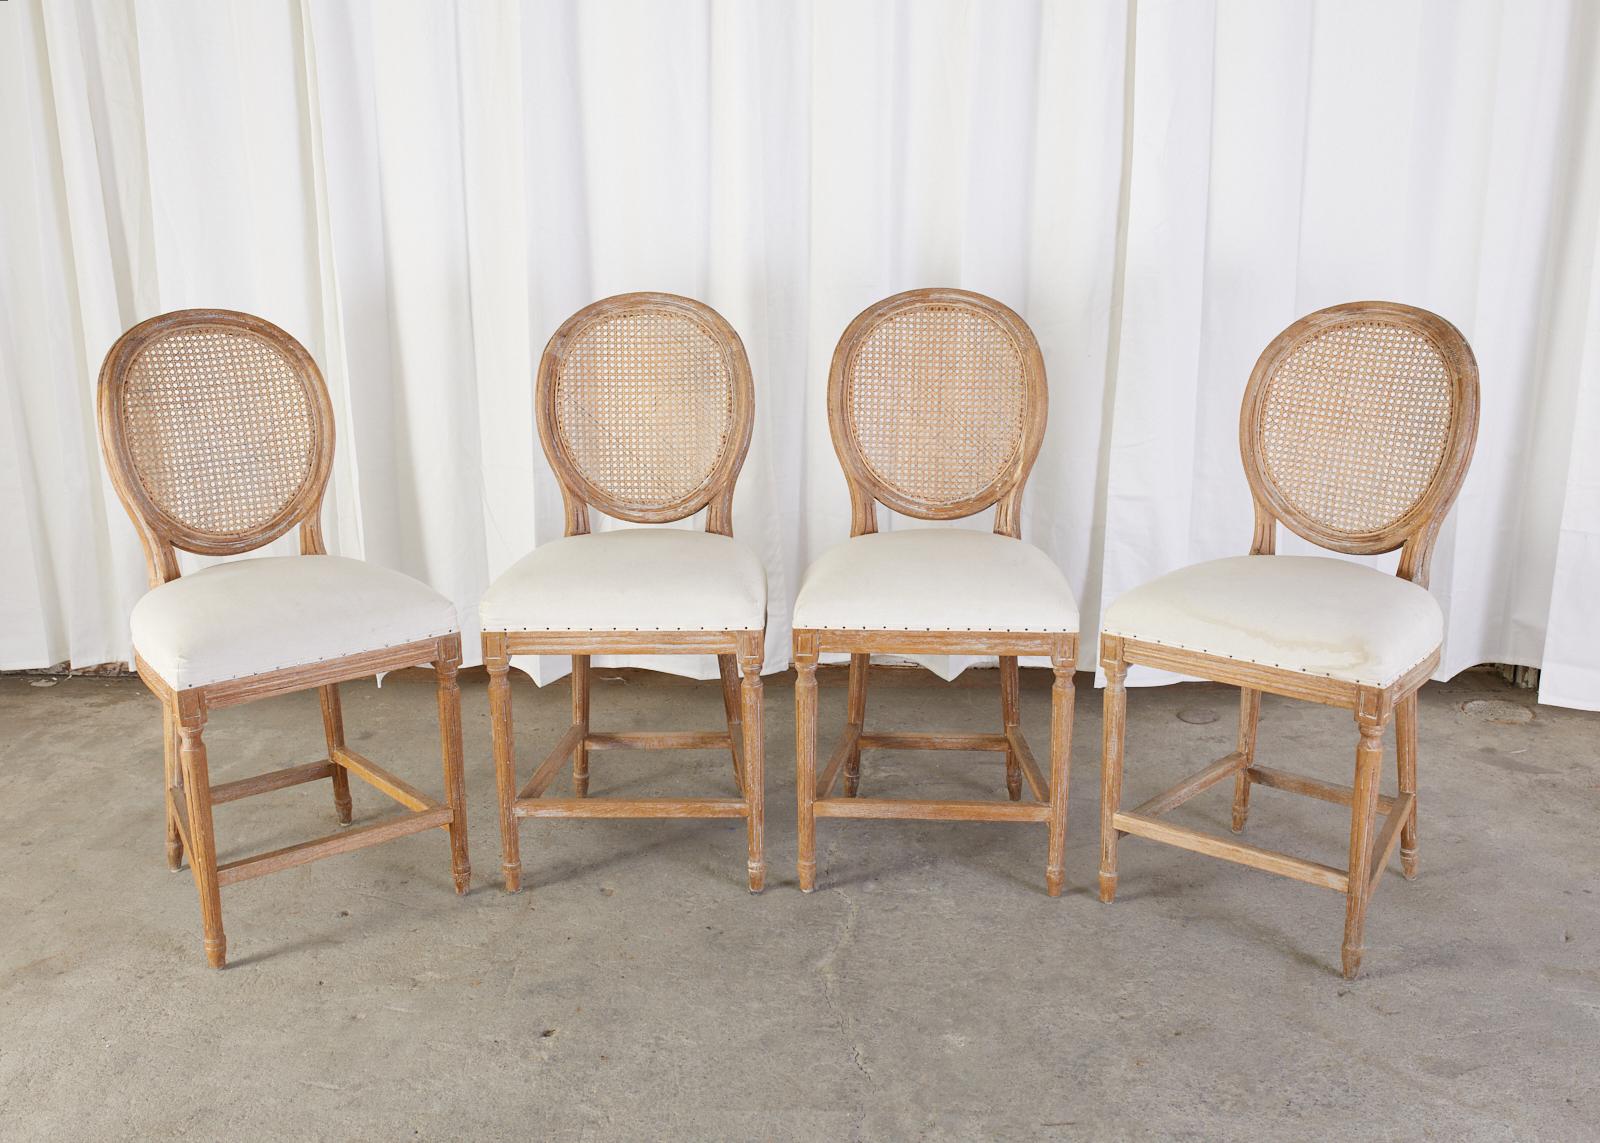 Gorgeous set of four oak counter height bar stools with round cane backs. Made in the grand French Louis XVI style featuring an intentionally age, distressed, pickled, or bleached finish on the oak. The wood also has a lightly cerused patina to